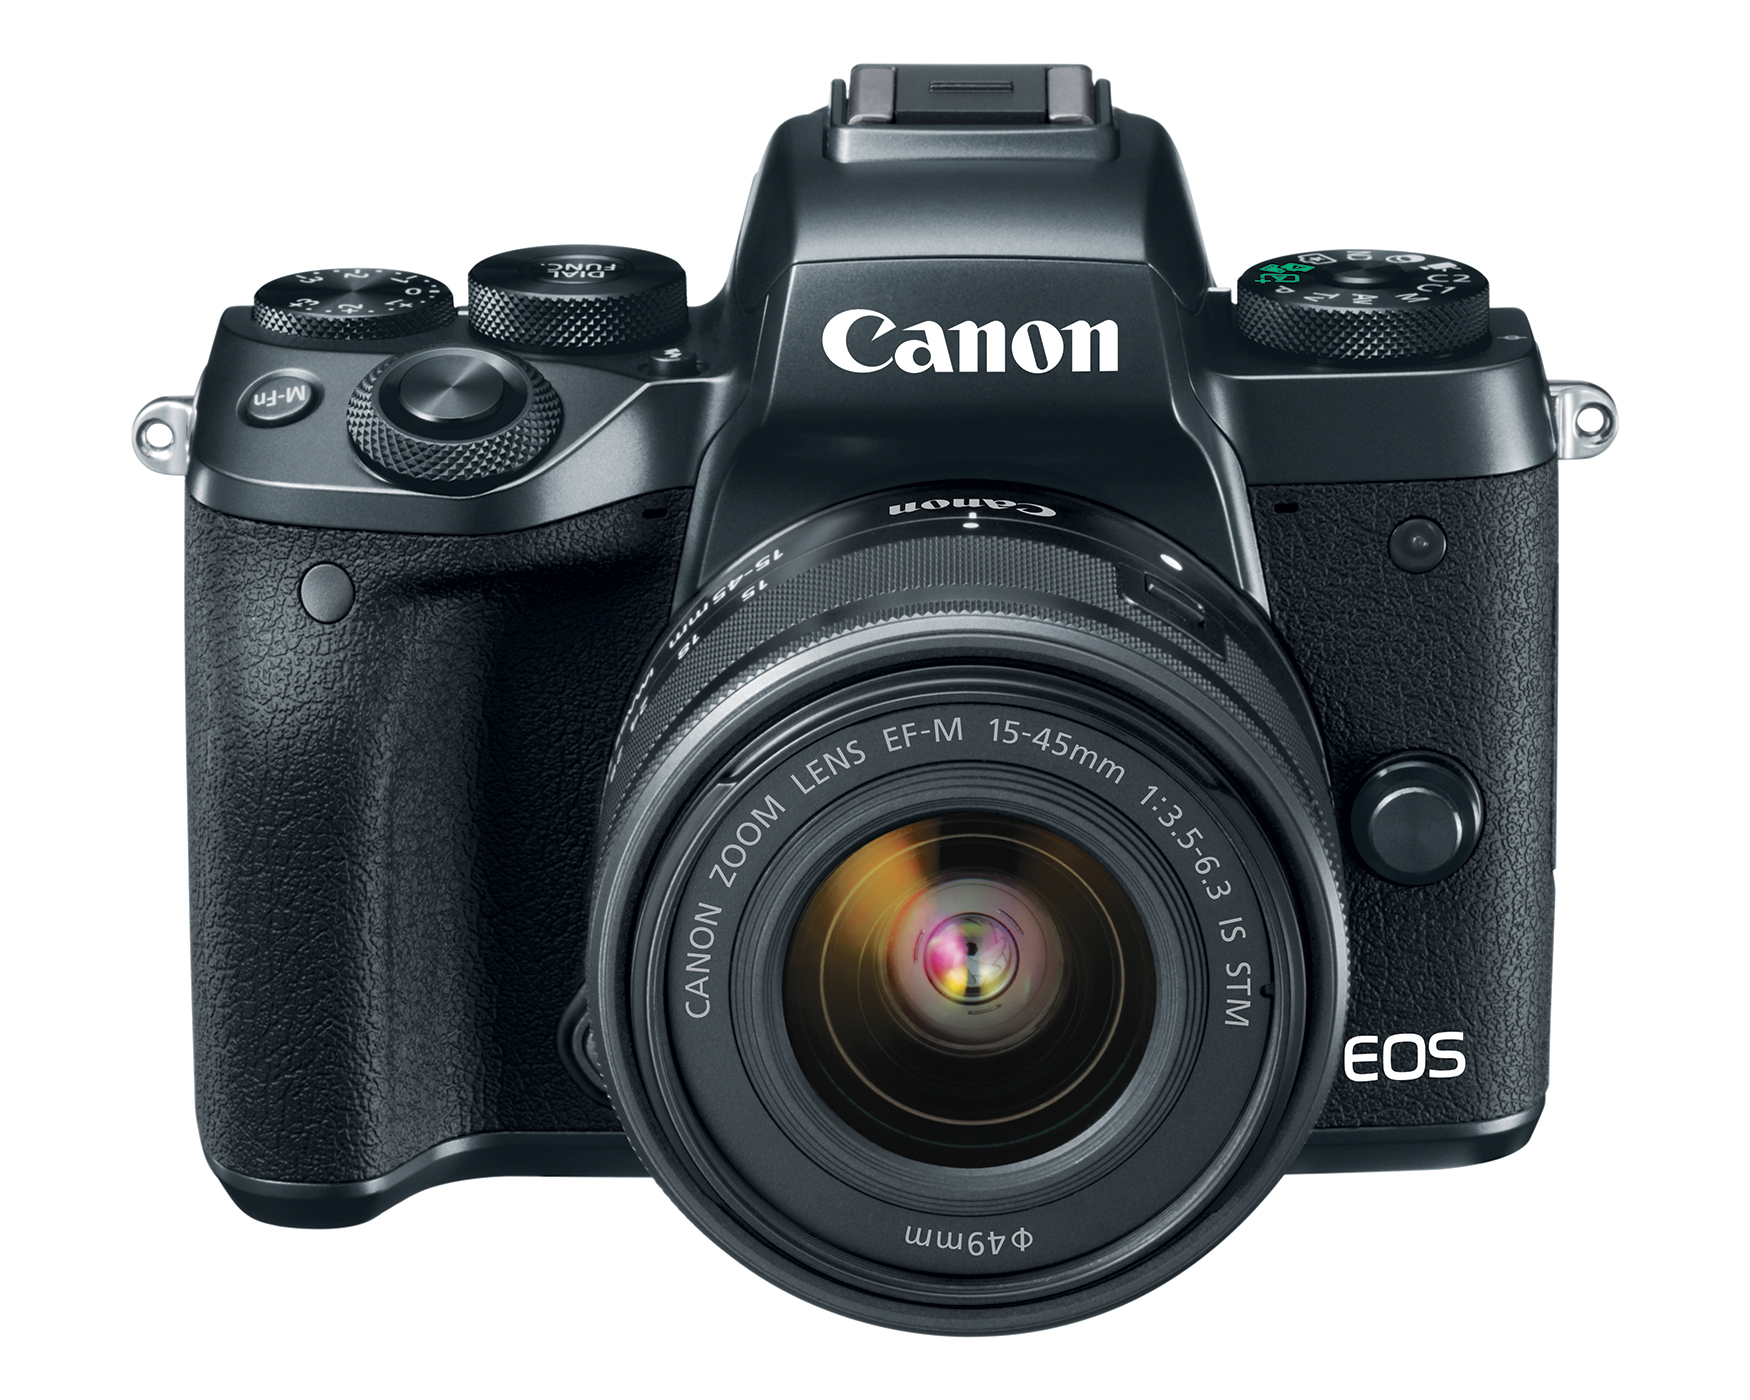 frequentie Handschrift Bedelen Canon Announces EOS M5 Flagship Mirrorless Camera And EF-M 18-150mm  f/3.5-6.3 IS STM lens